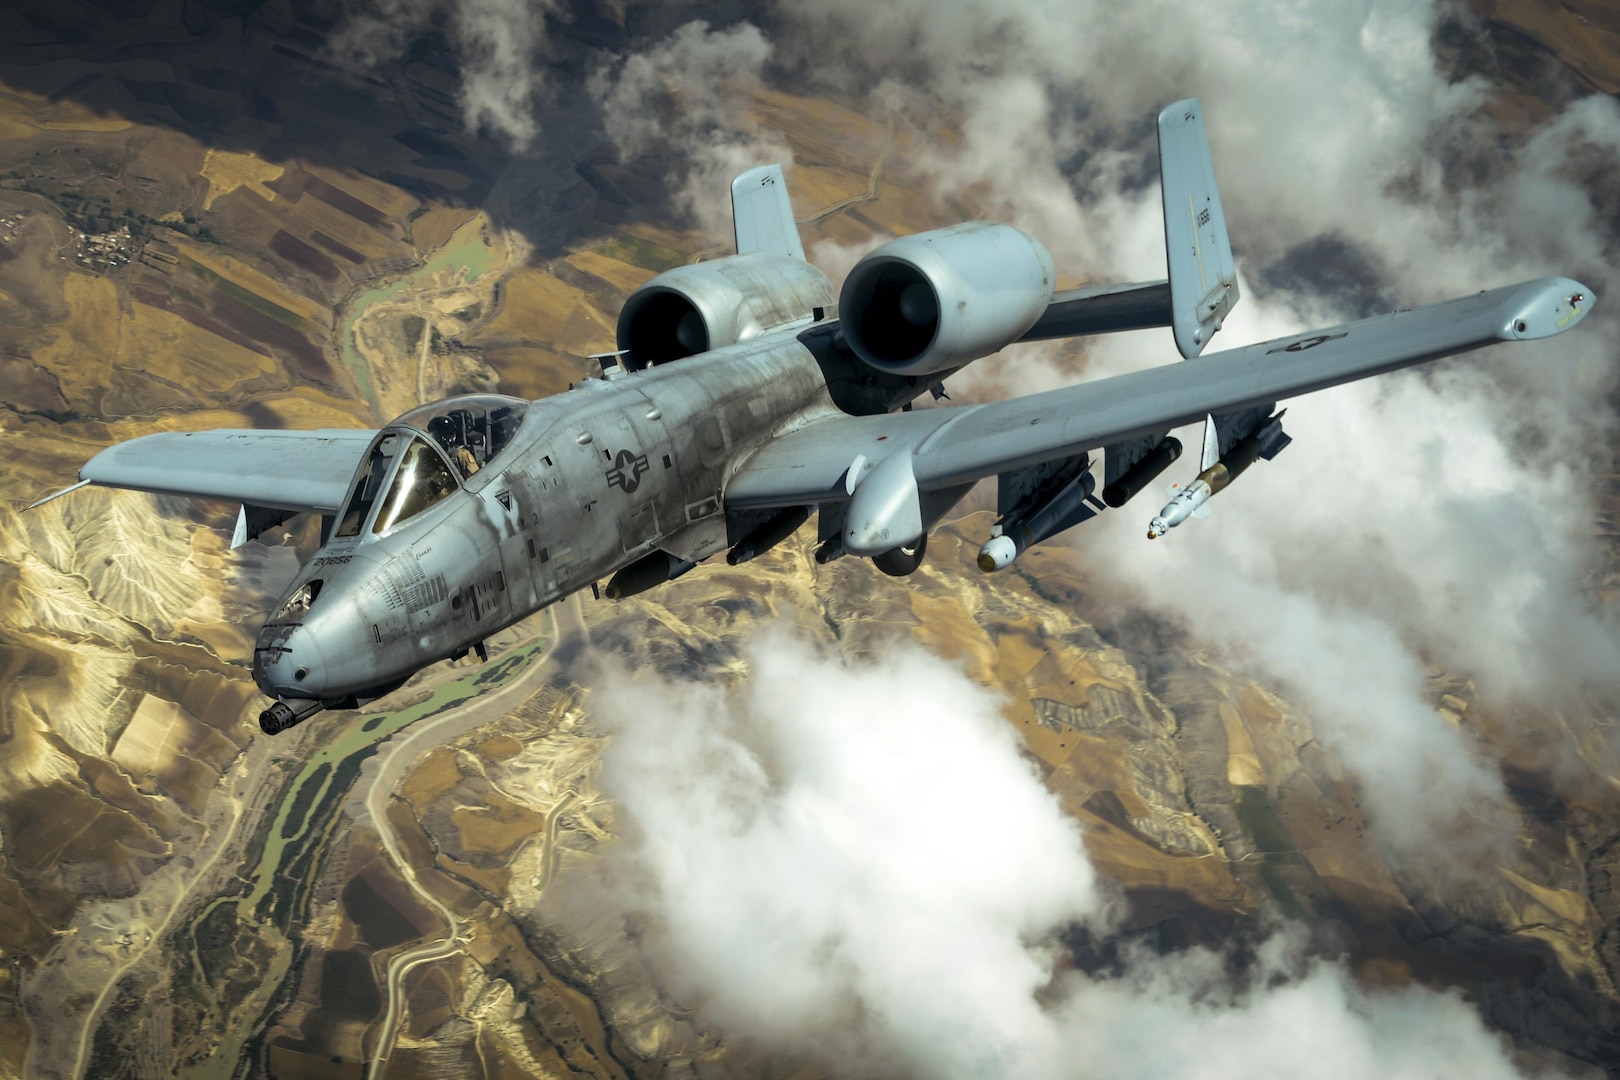 An Air Force A-10 Thunderbolt II flies in an undisclosed location after receiving fuel from a KC-10 Extender while supporting Operation Inherent Resolve, May 31, 2017. The A-10’s combat radius and short takeoff and landing capability permit operations in and out of locations near front lines. Air Force photo by Staff Sgt. Michael Battles